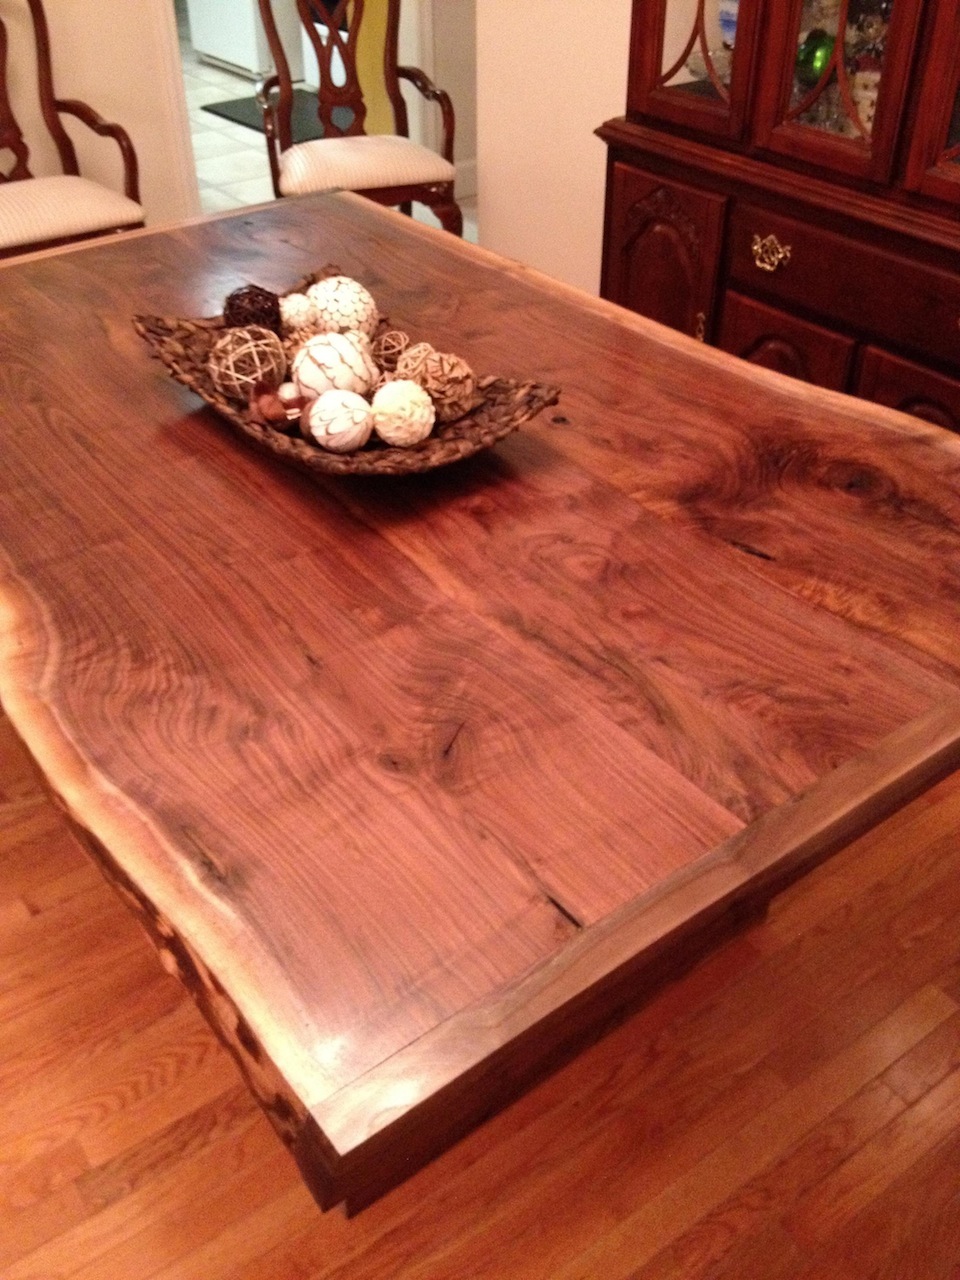 Jeff's Live Edge Dining Table - The Wood Whisperer